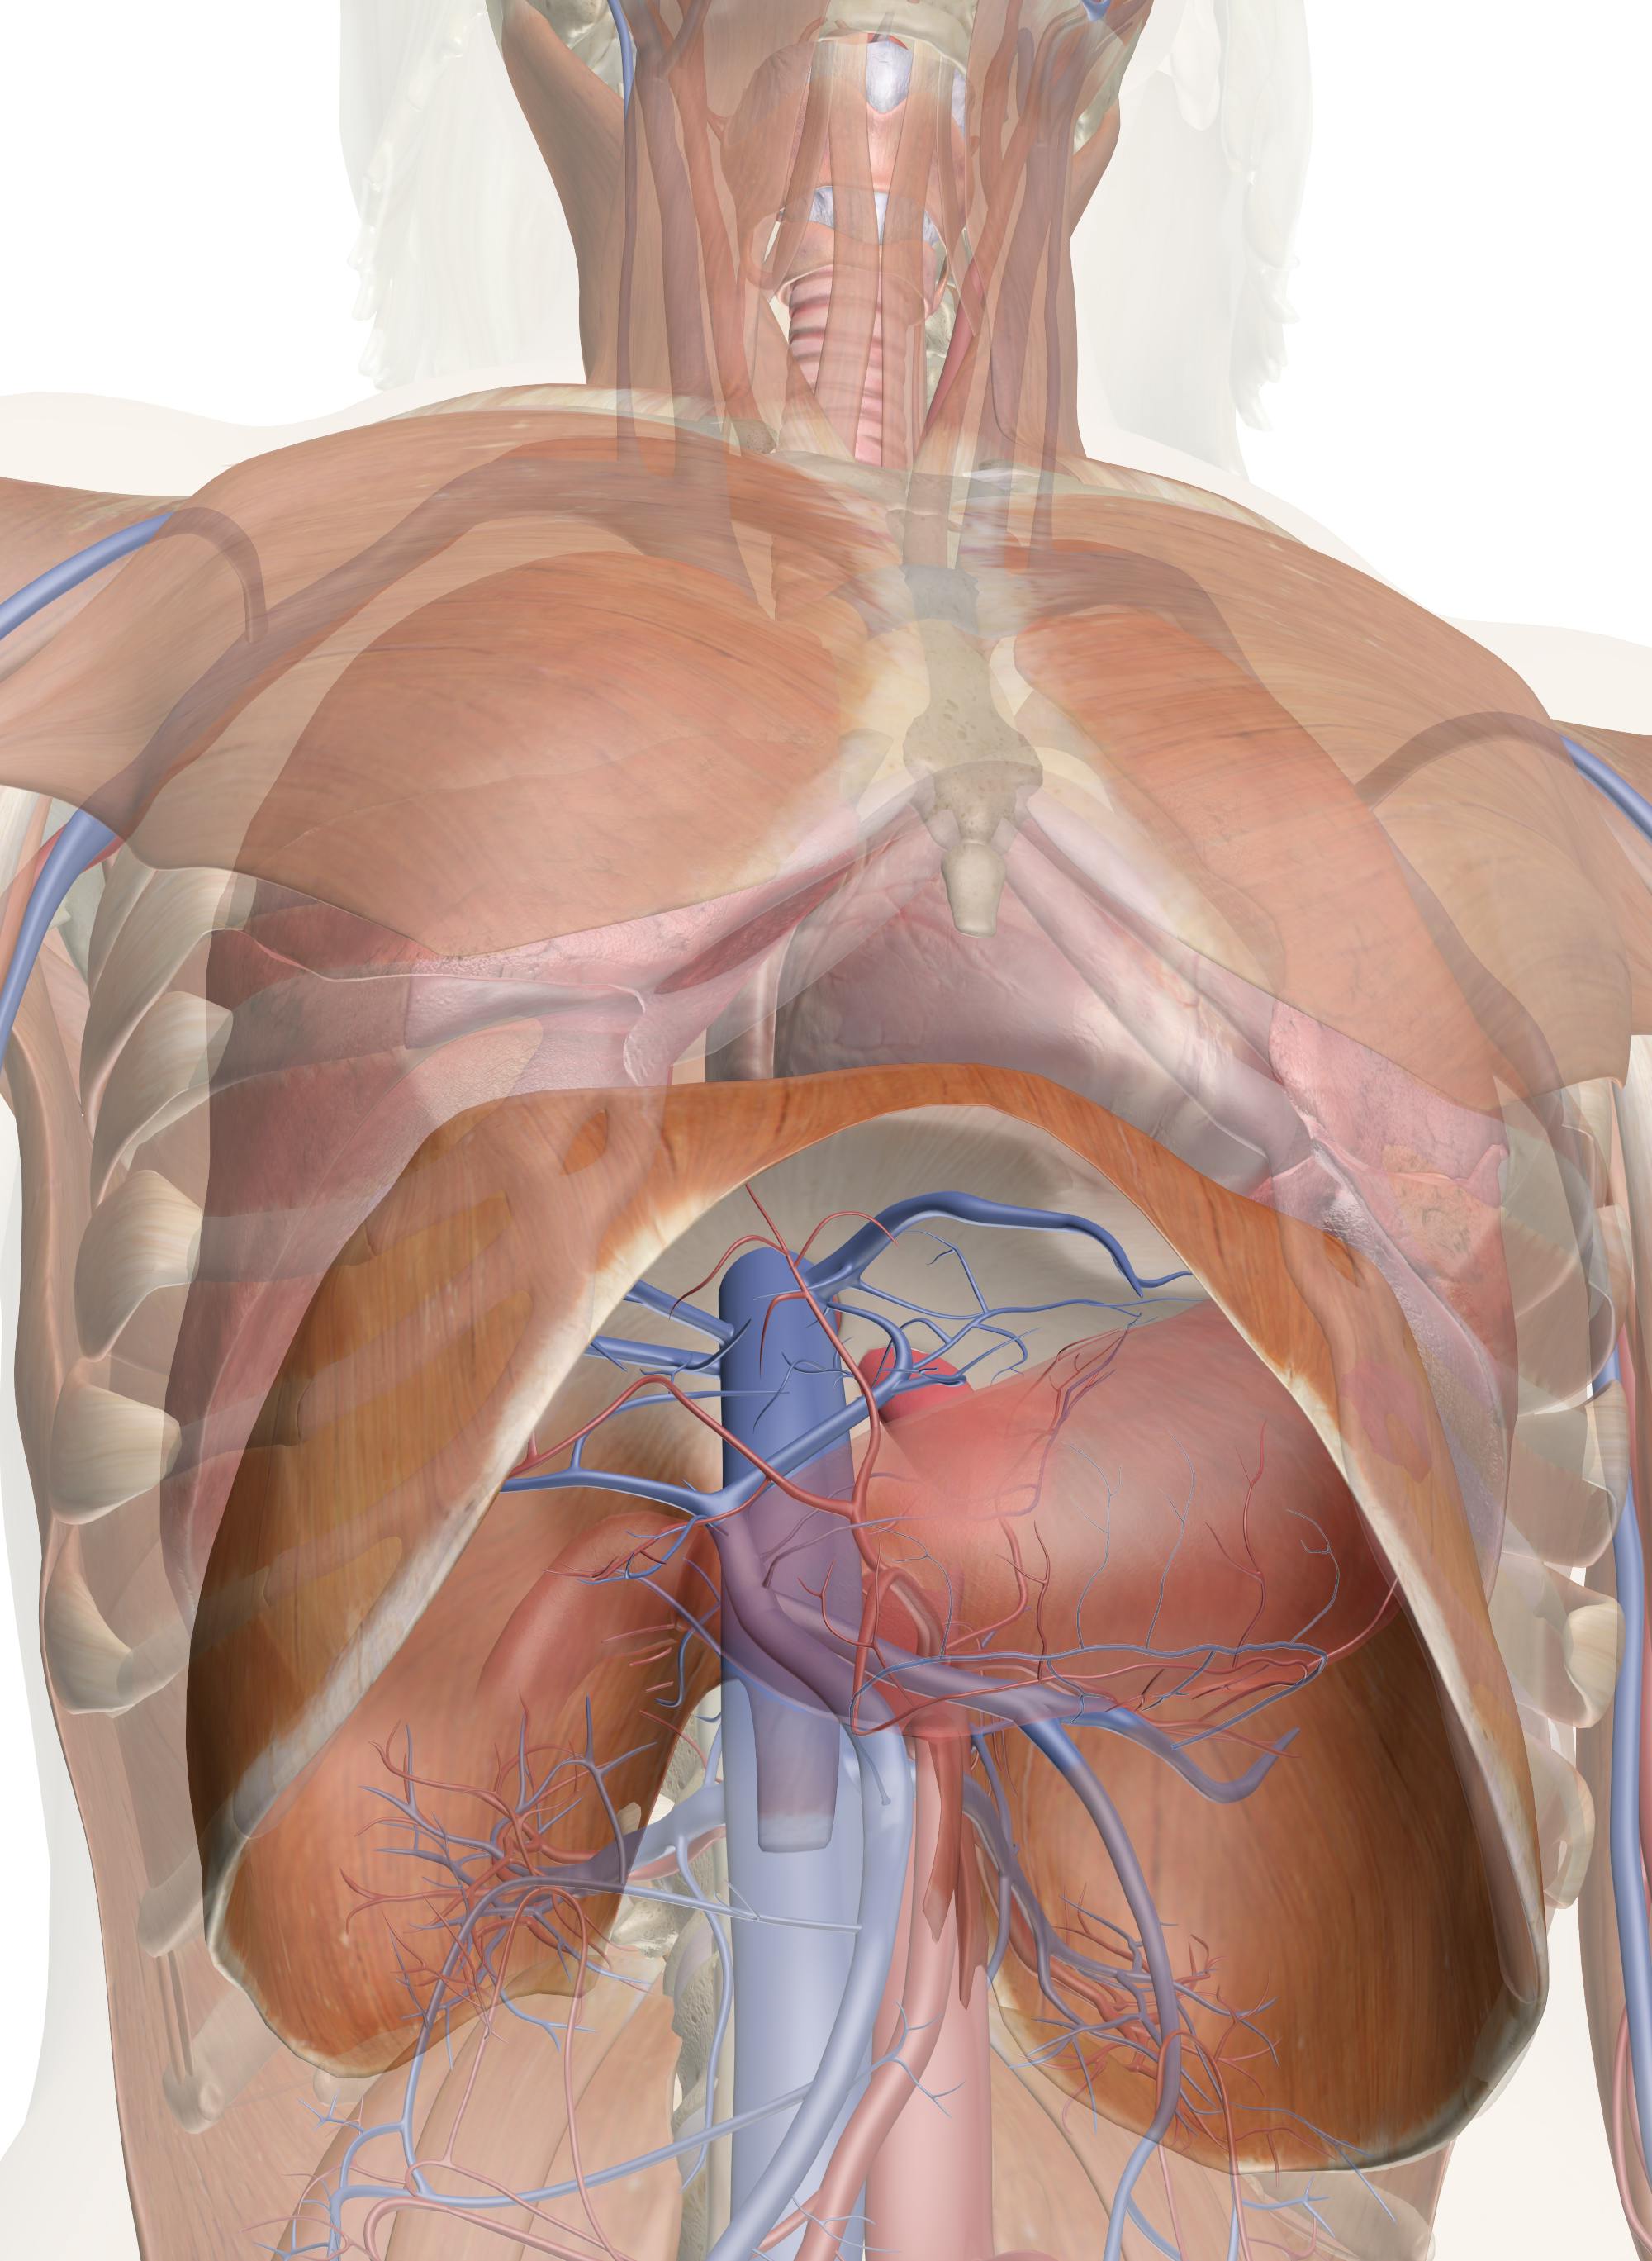 Diaphragm Anatomy Pictures And Information